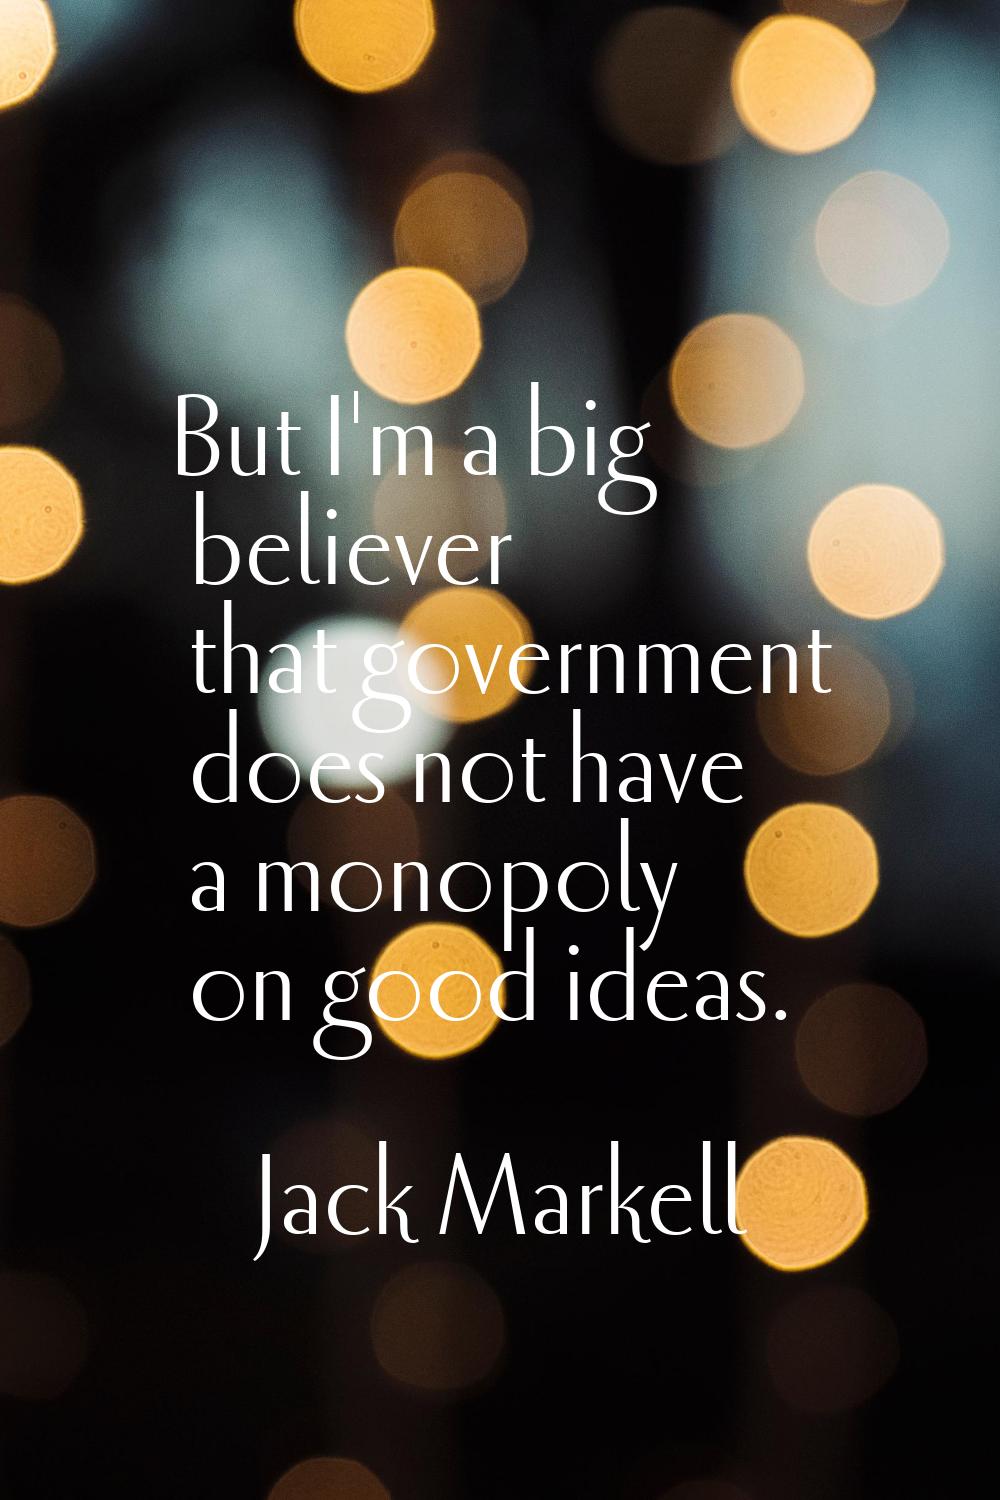 But I'm a big believer that government does not have a monopoly on good ideas.